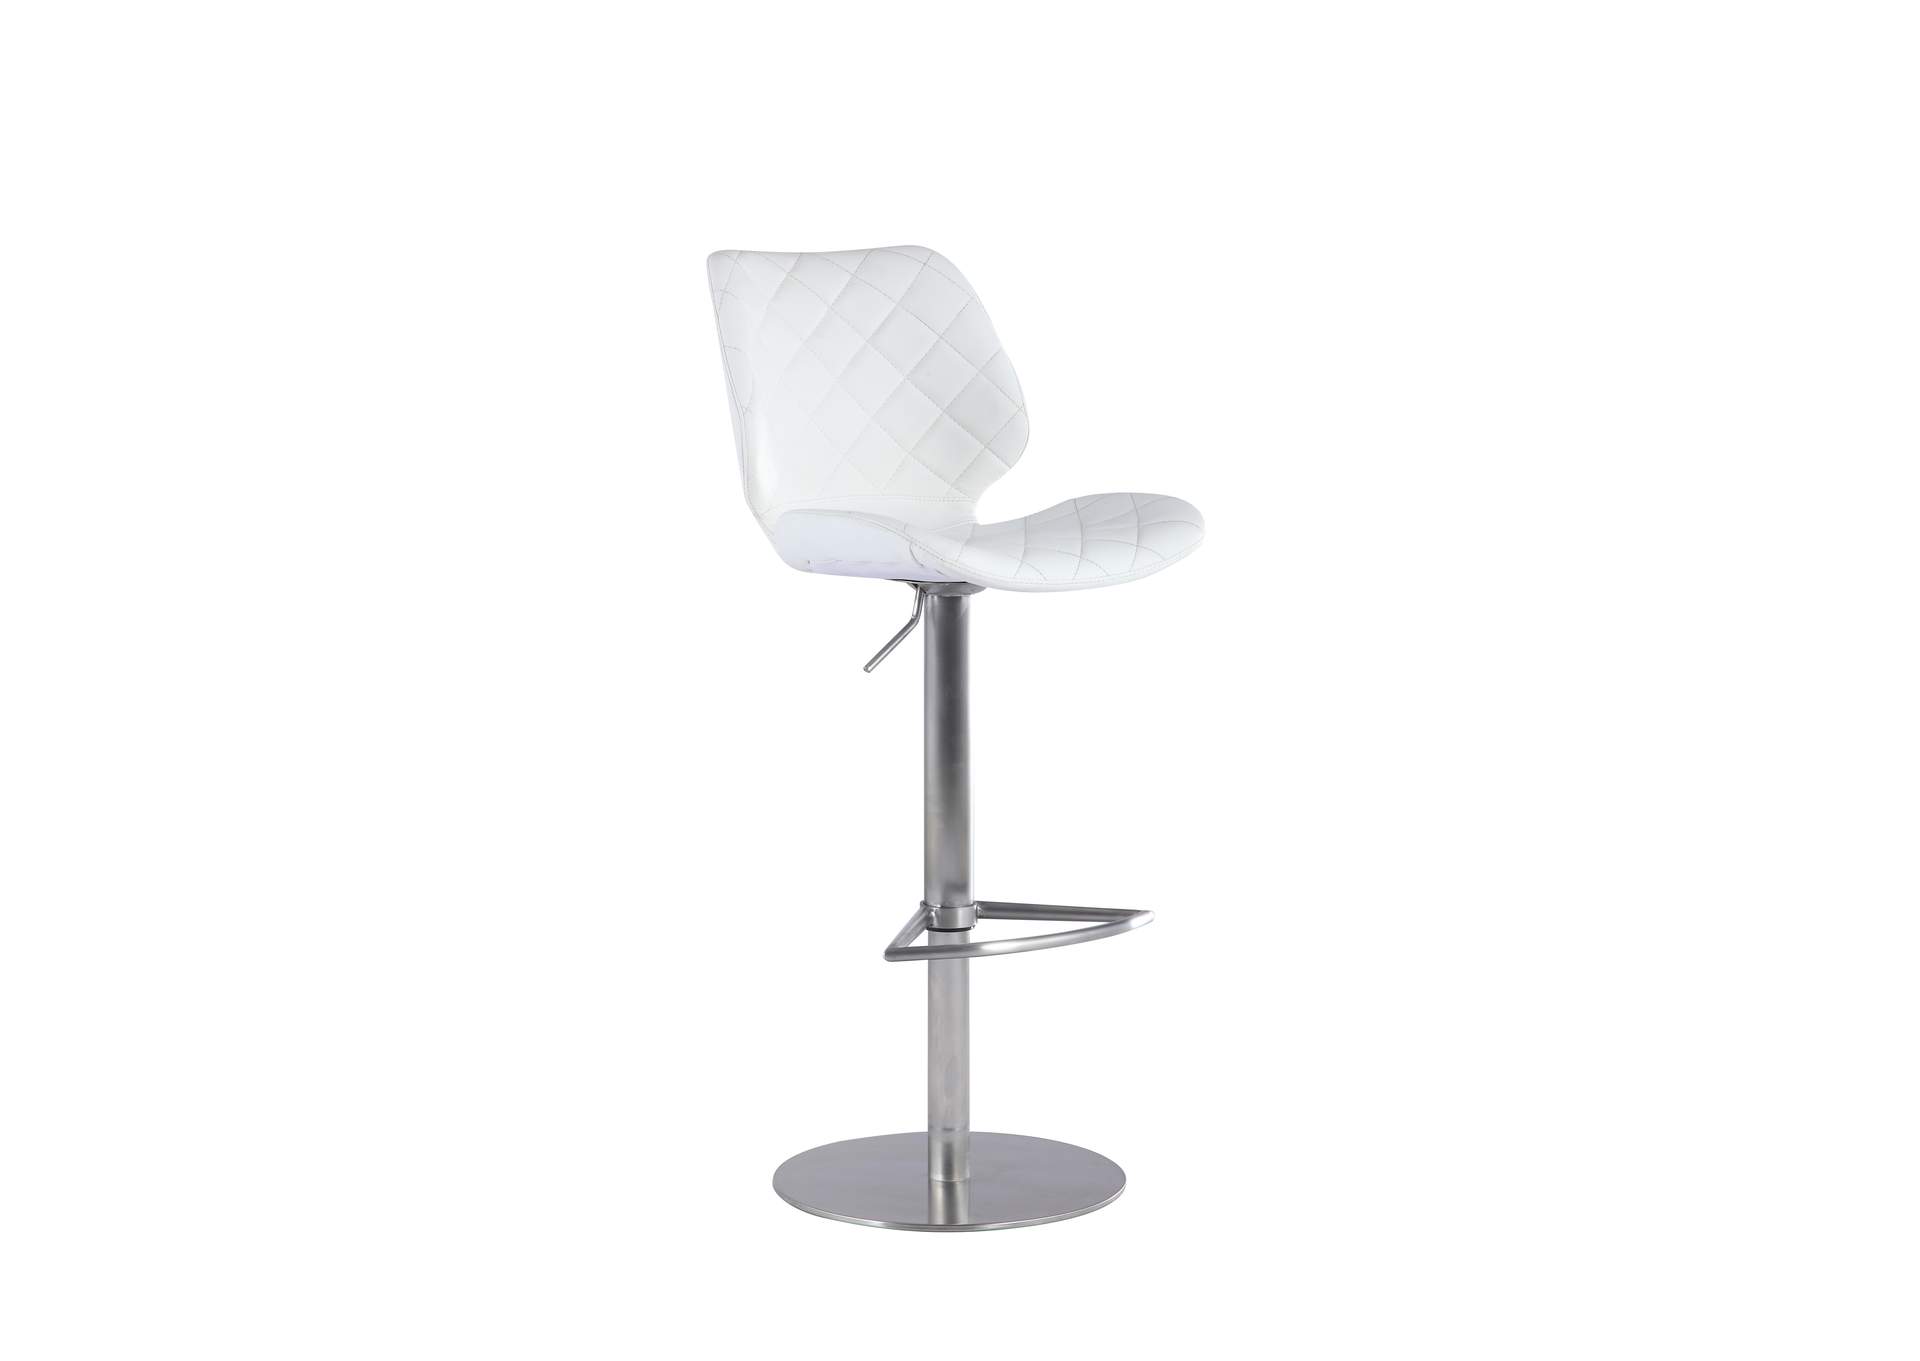 Brushed Stainless Steel Modern Pneumatic-Adjustable Stool w/ Diamond Stitched Seat,Chintaly Imports